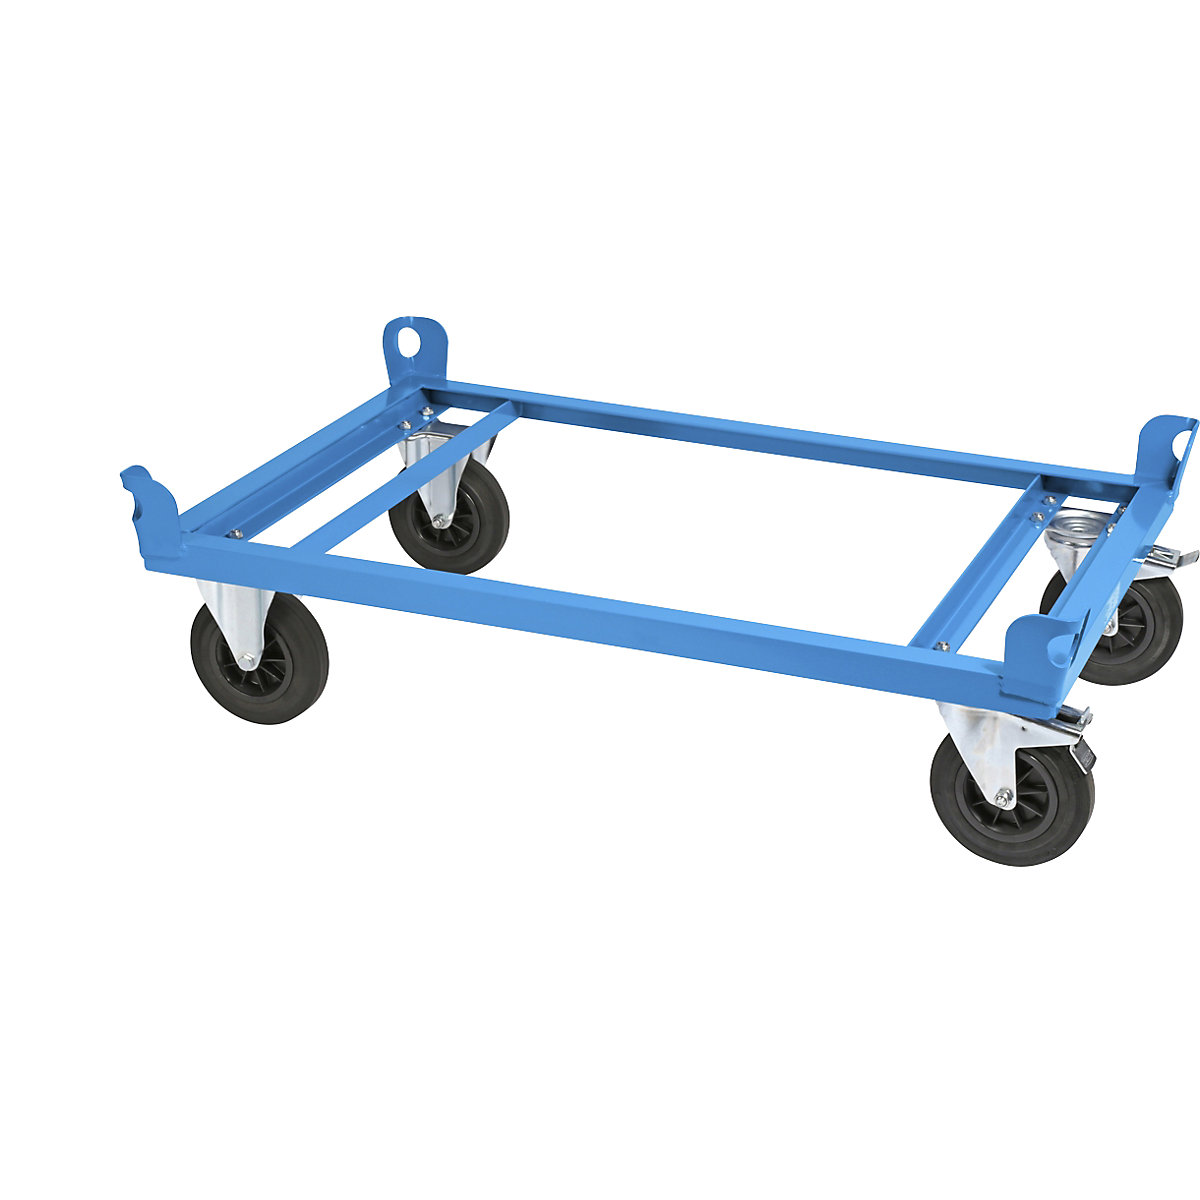 Steel wheeled base – eurokraft pro, for Euro pallets, max. load 500 kg, loading height 280 mm, blue, 10+ items-5